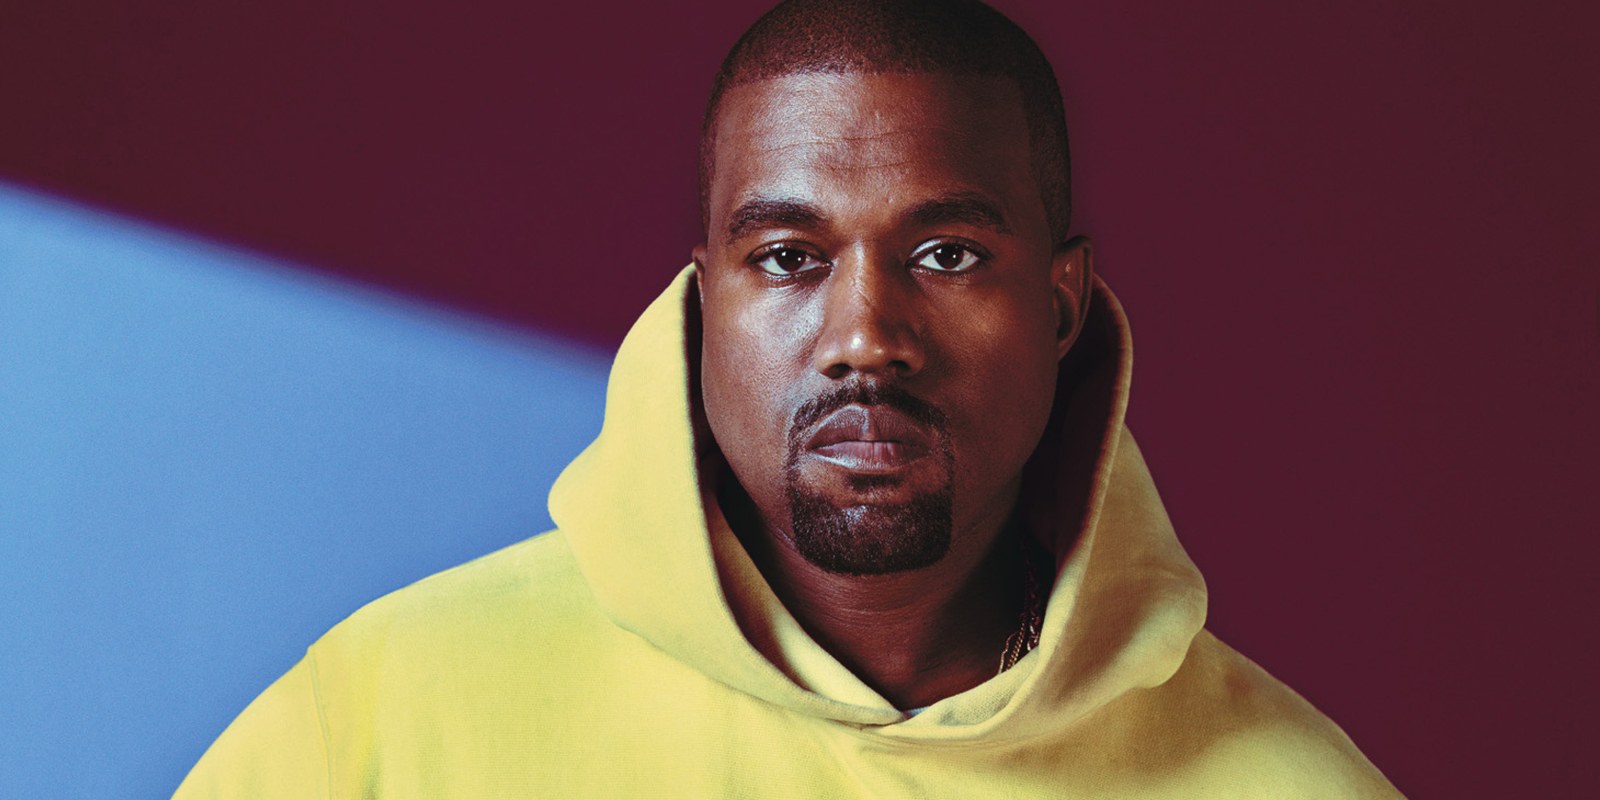 Kanye West speaks about his faith in JESUS CHRIST